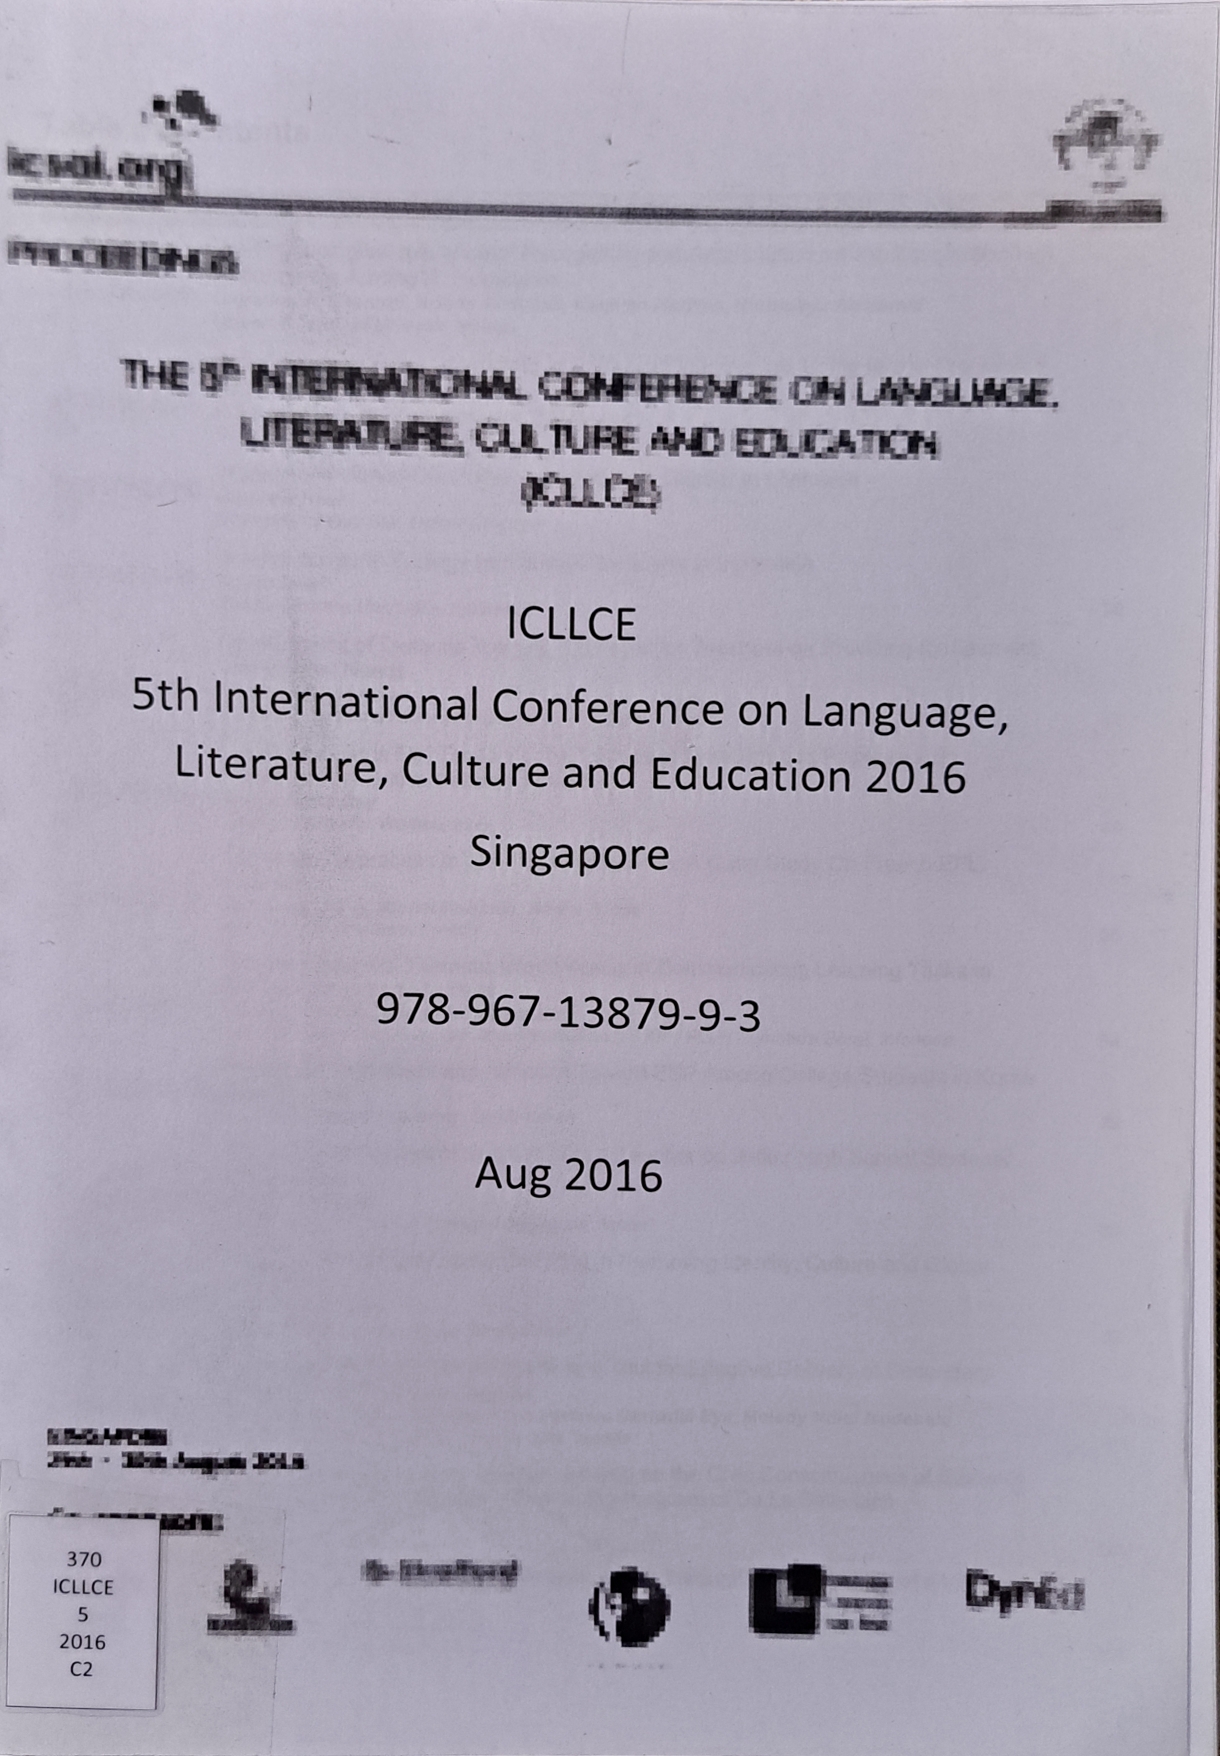 Cover image for 5th International conference on language, literature, culture and education 2016 Singapore (ICLLCE) / Aug 2016 bibliographic